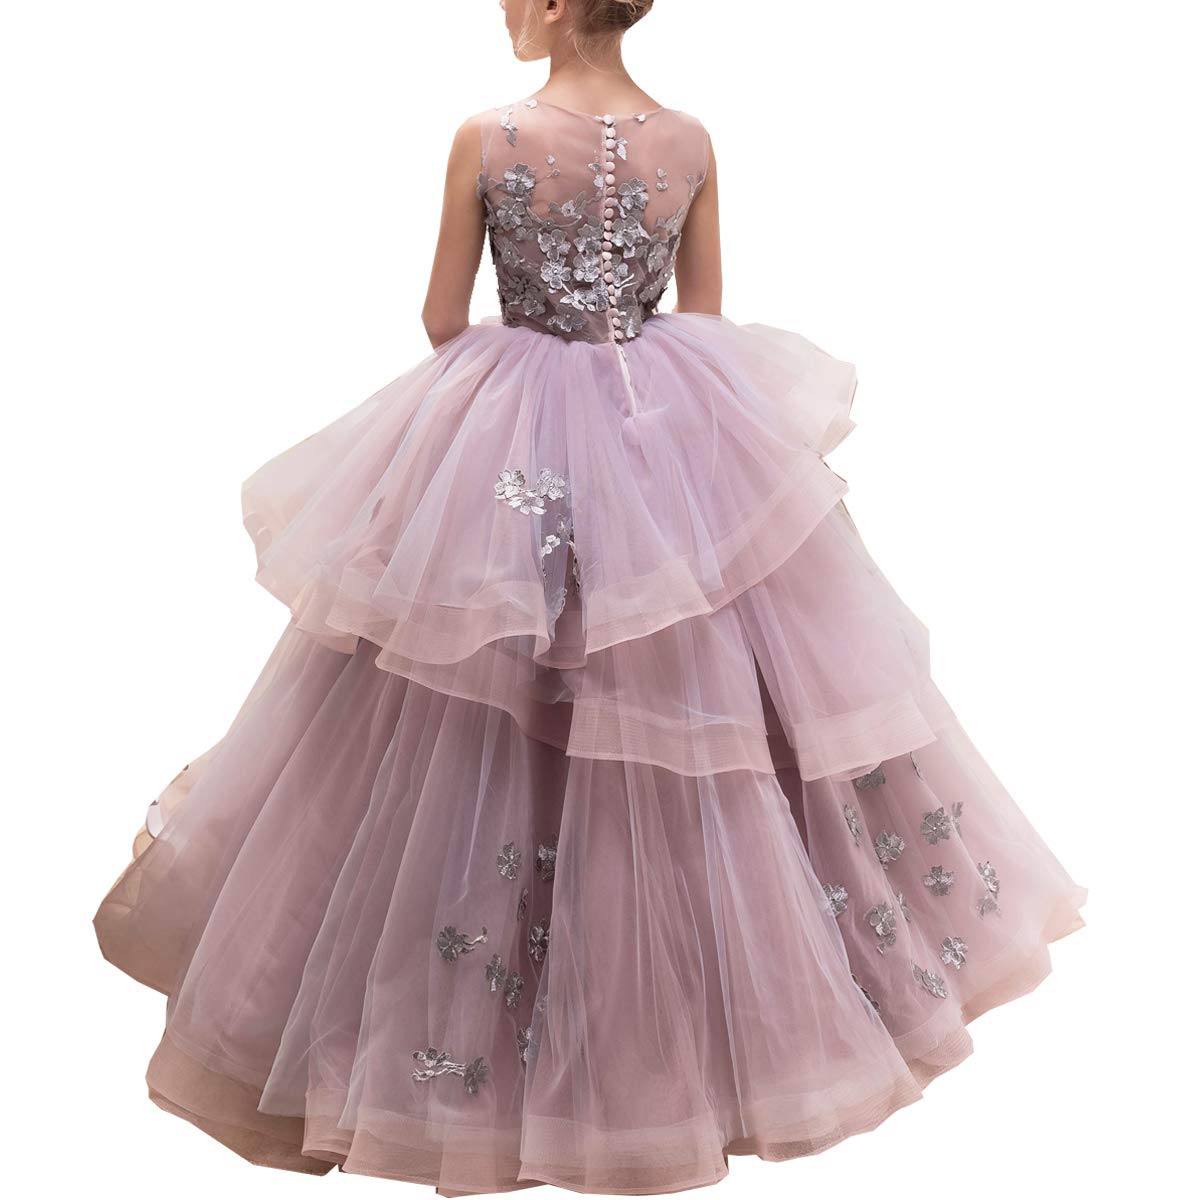 Flower Girl Dresses for Wedding Floor Length Ball Gown Pageant Puffy Tulle Dresses Flower Embroidery Princess Dresses